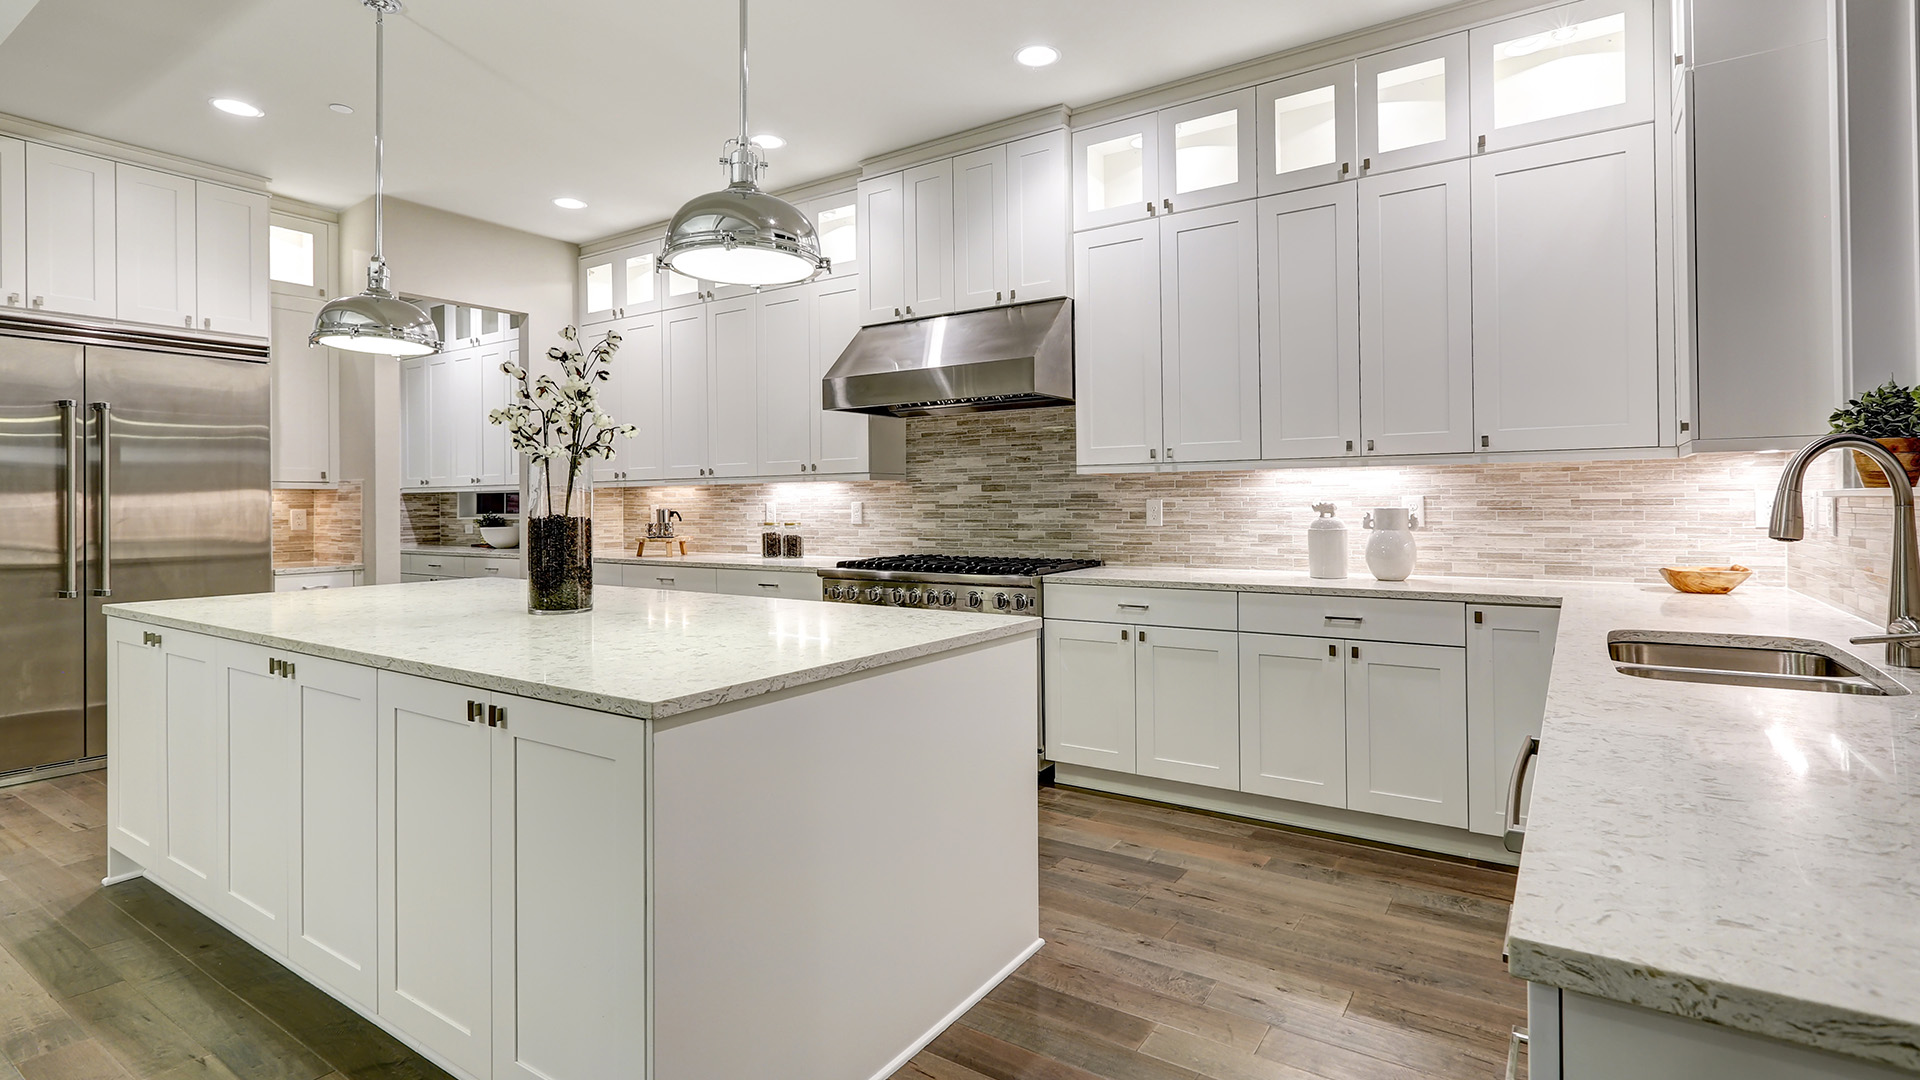 Designing Your Dream Kitchen with Royal Shaker Cabinets